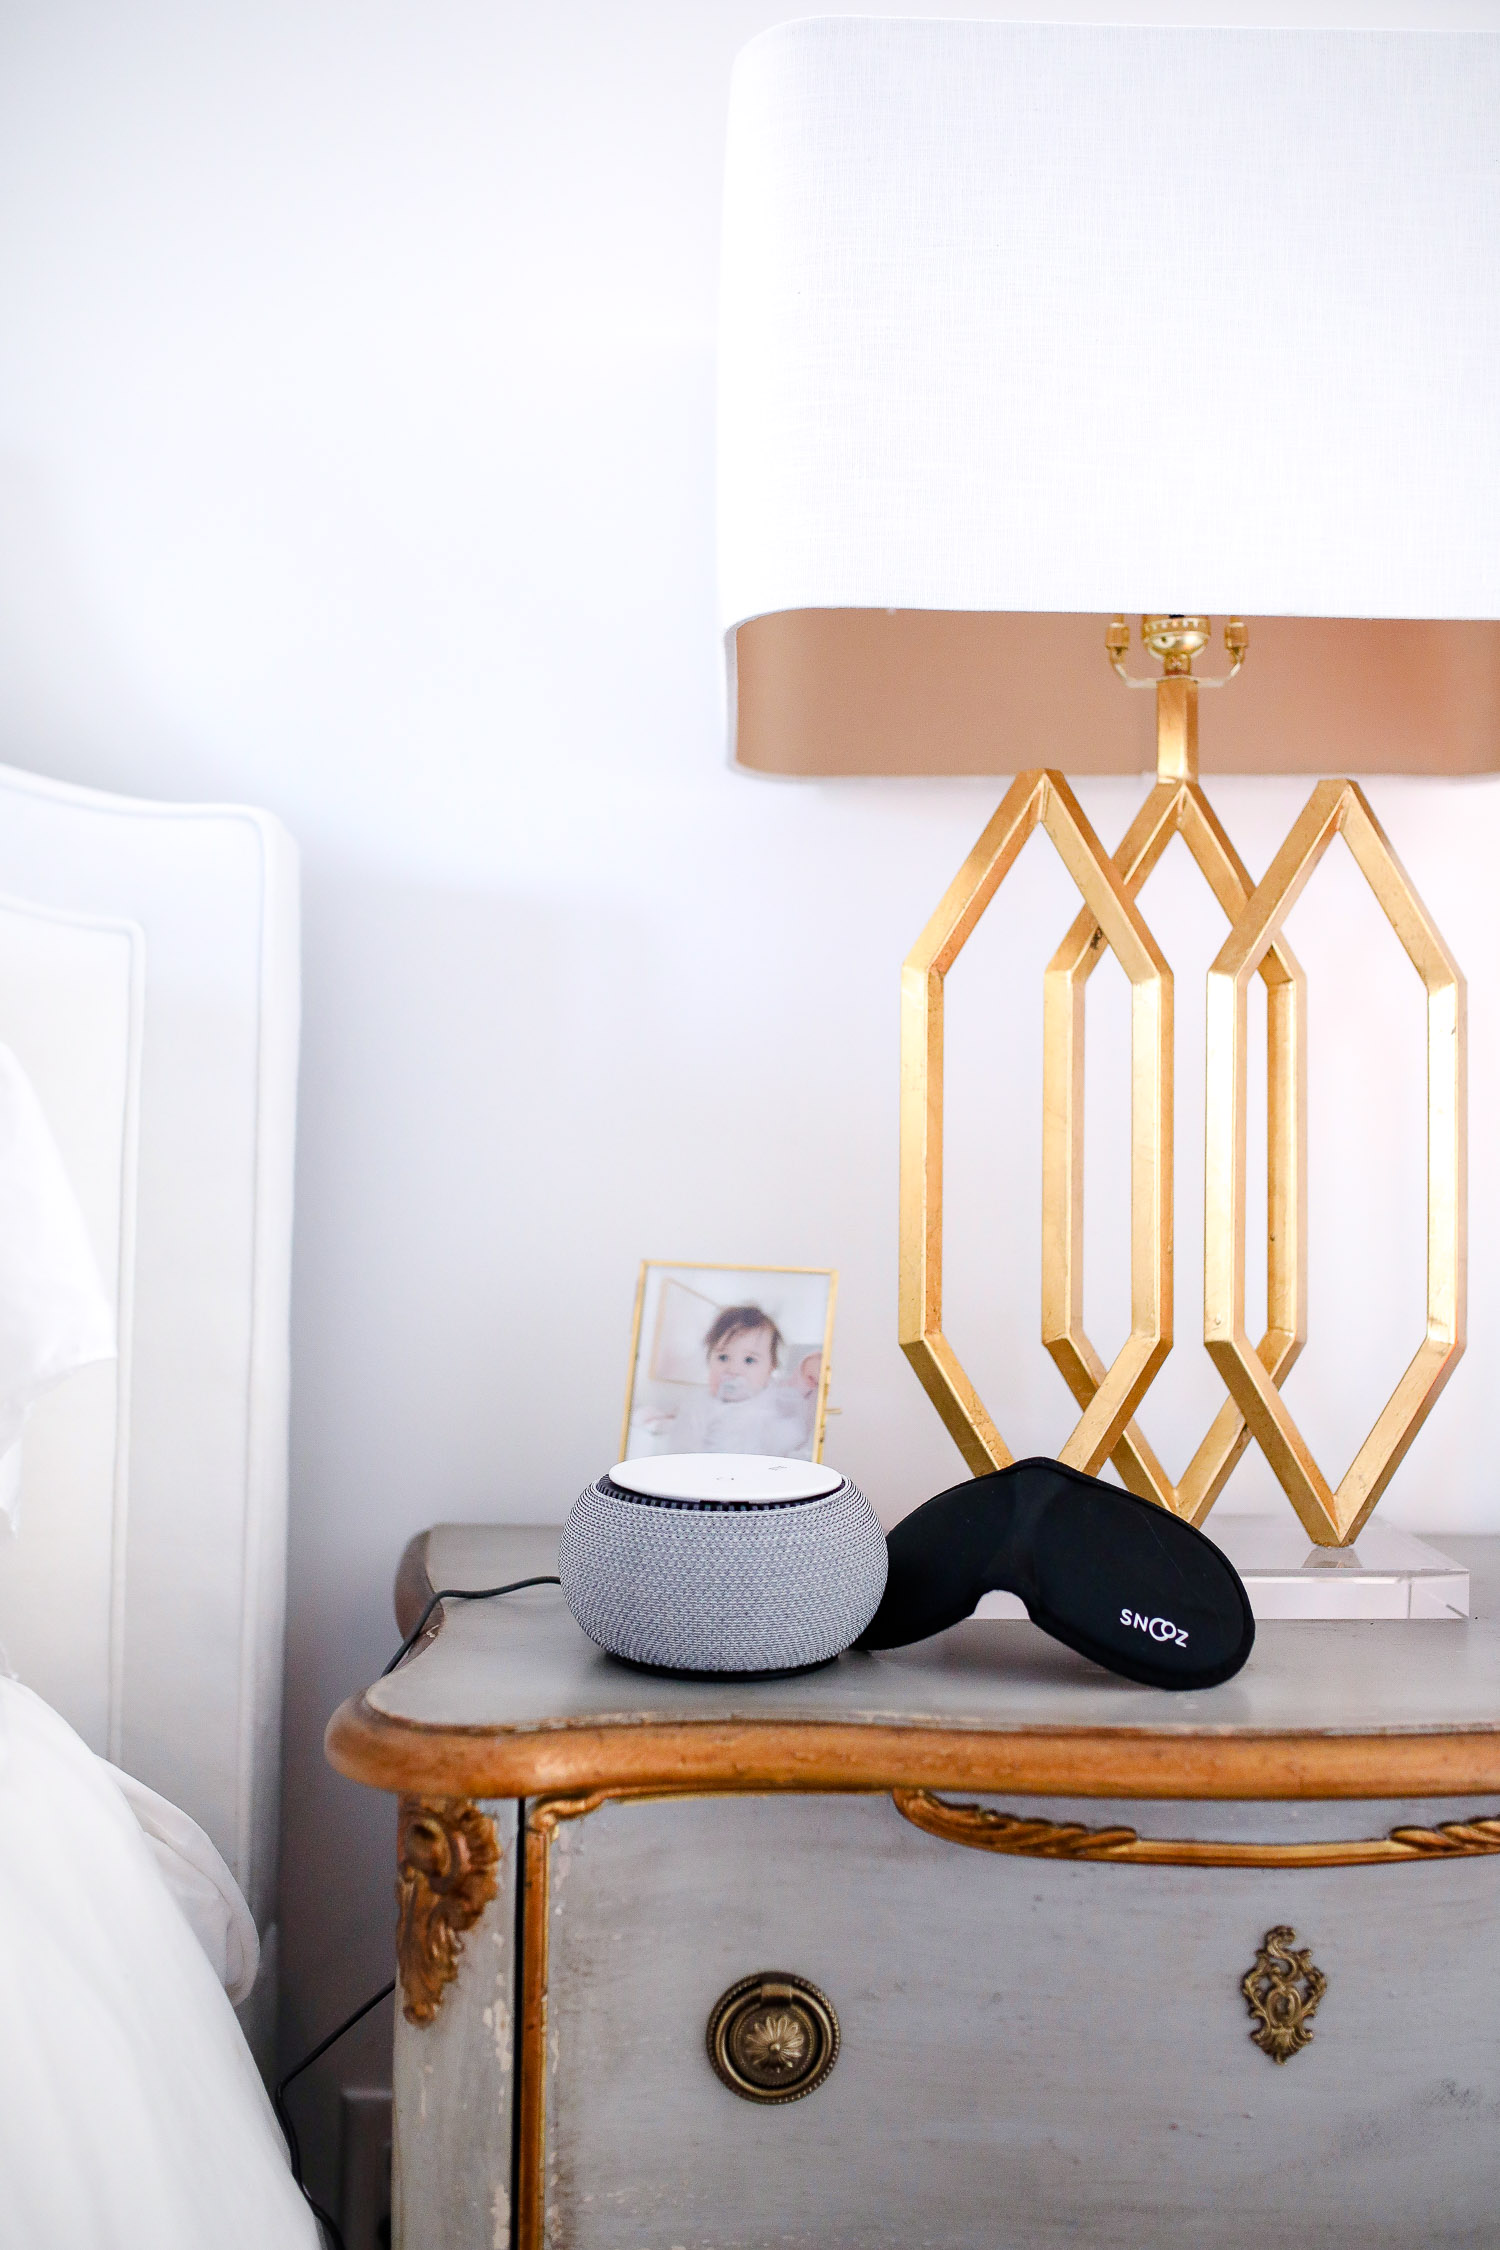 verishop, verishop review, pinterest master bedroom inspo, emily gemma, hooker furniture nightstands-2 | Cozy Essentials by popular US fashion blog, The Sweetest Thing: image of a nightstand with a Snooz SNOOZ White Noise Sound Machine and Snooz sleep mask. 